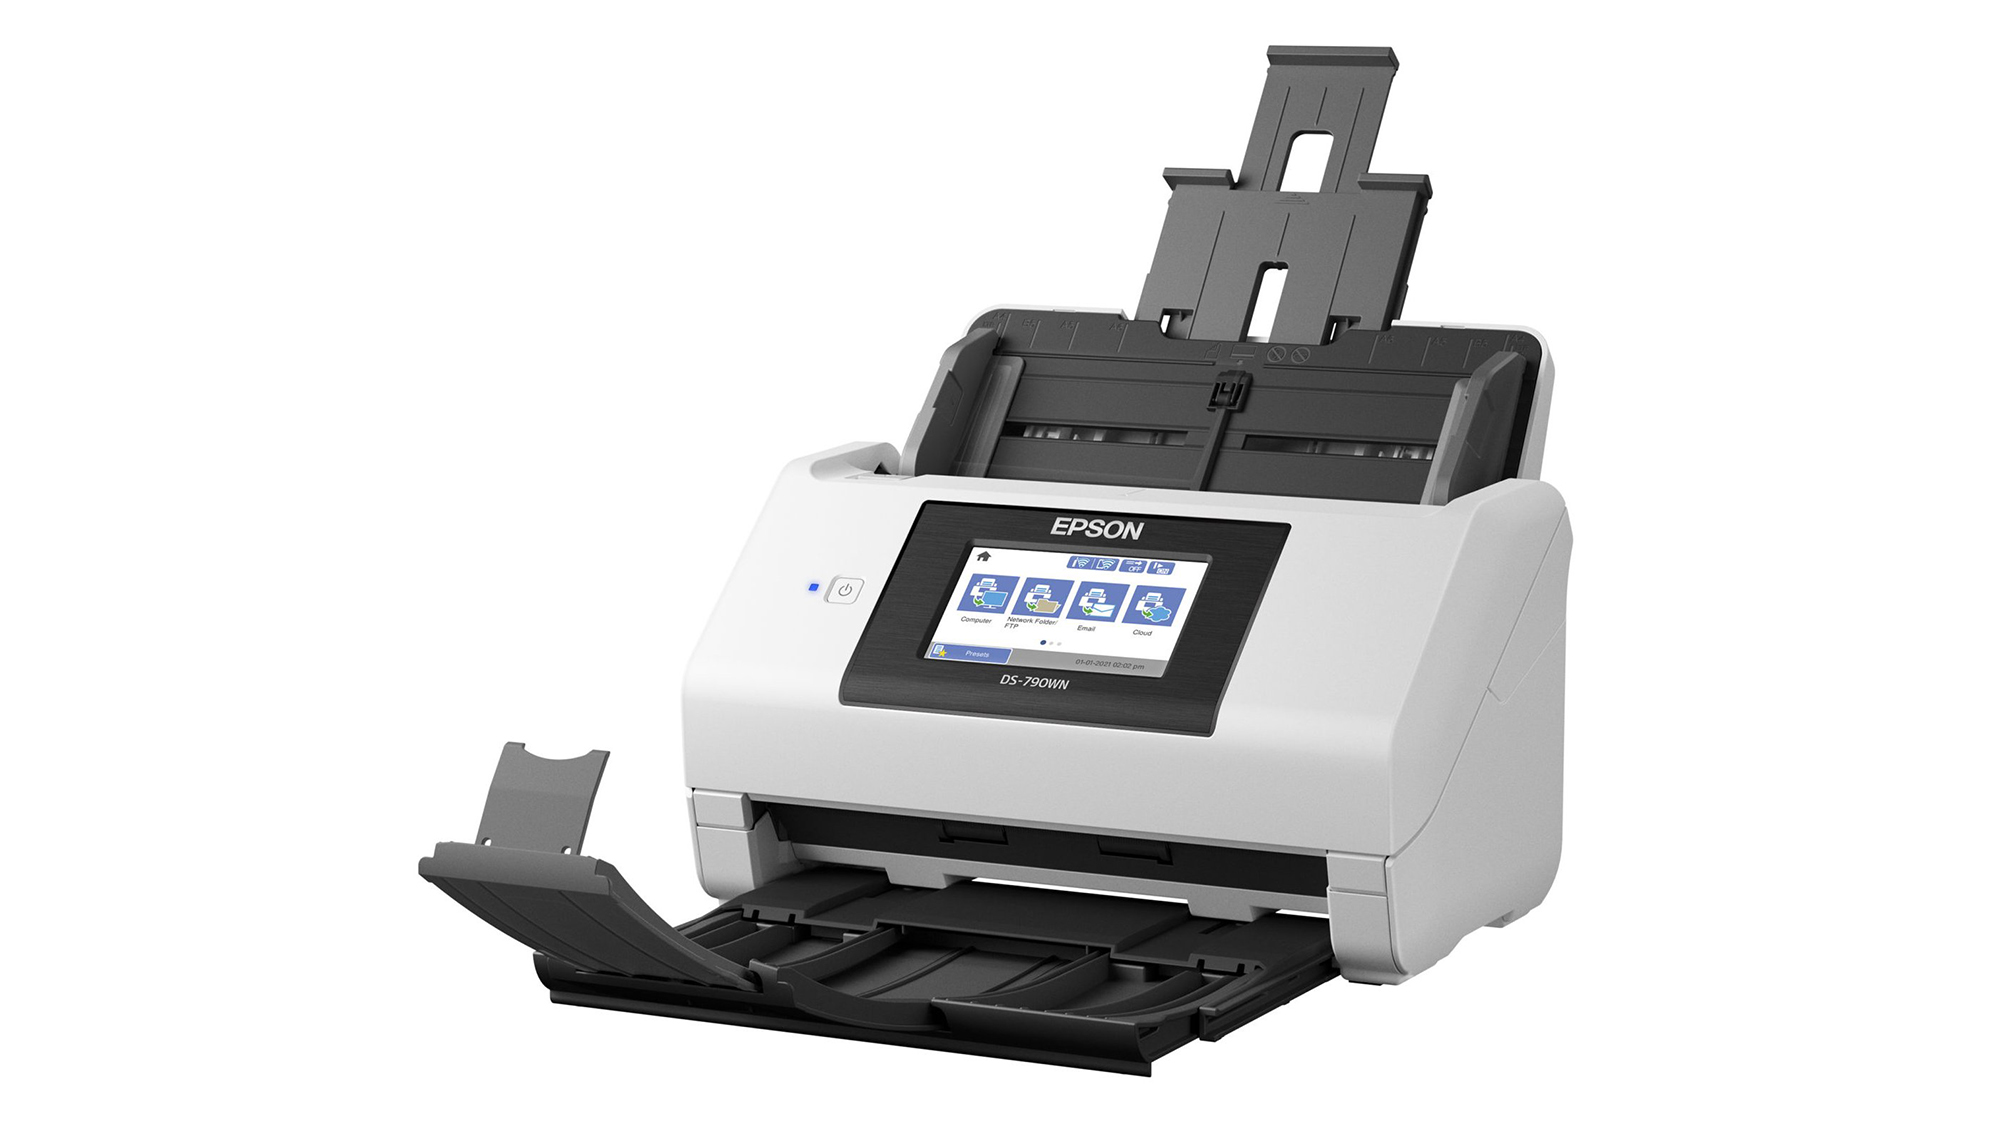 Epson WorkForce Scanning covers every | ITPro